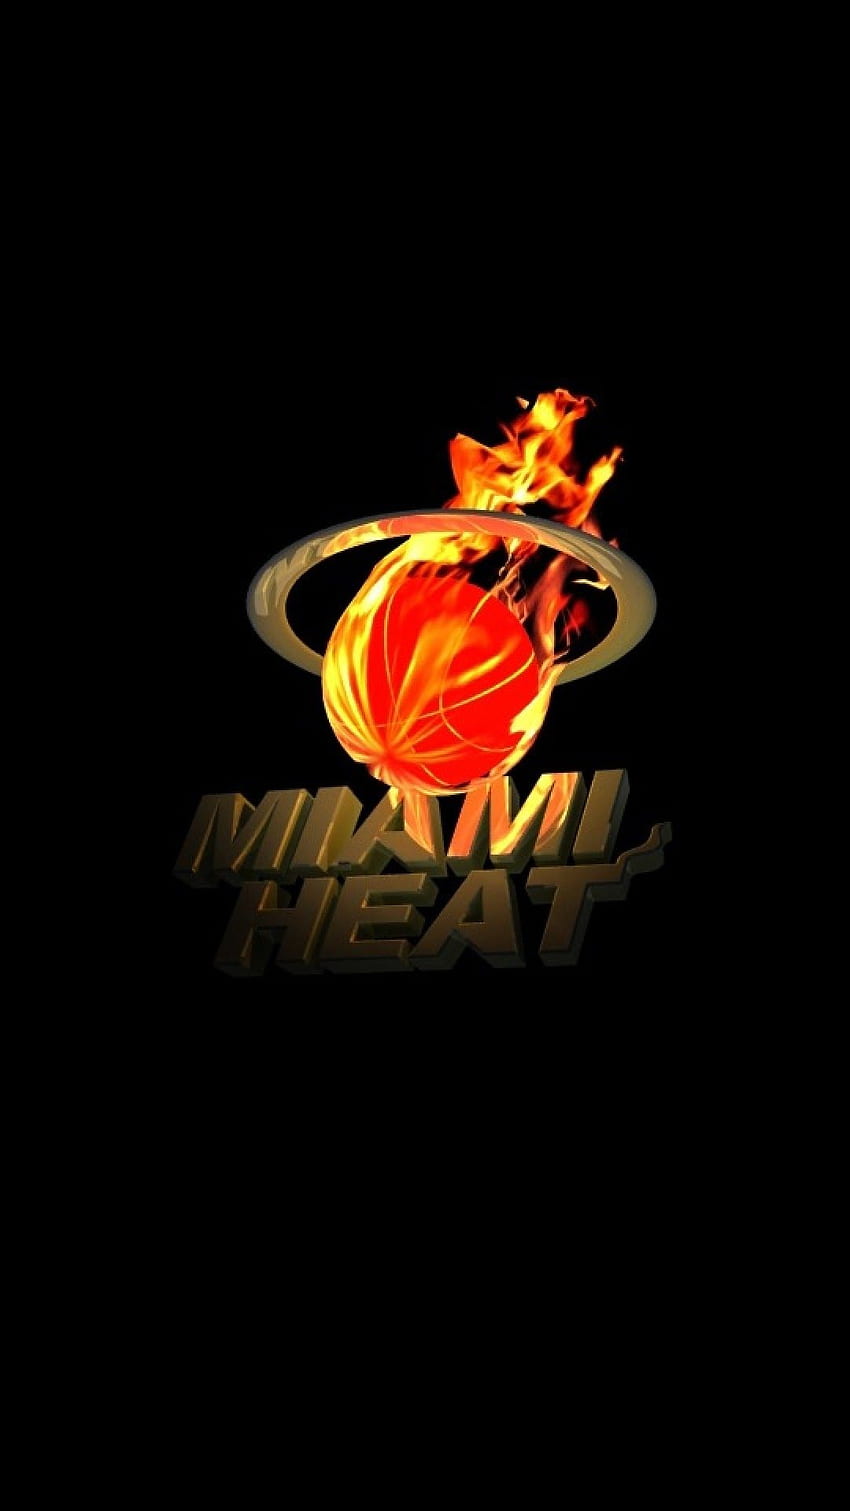 Android Best : Miami Heat Logo Android Best HD phone wallpaper